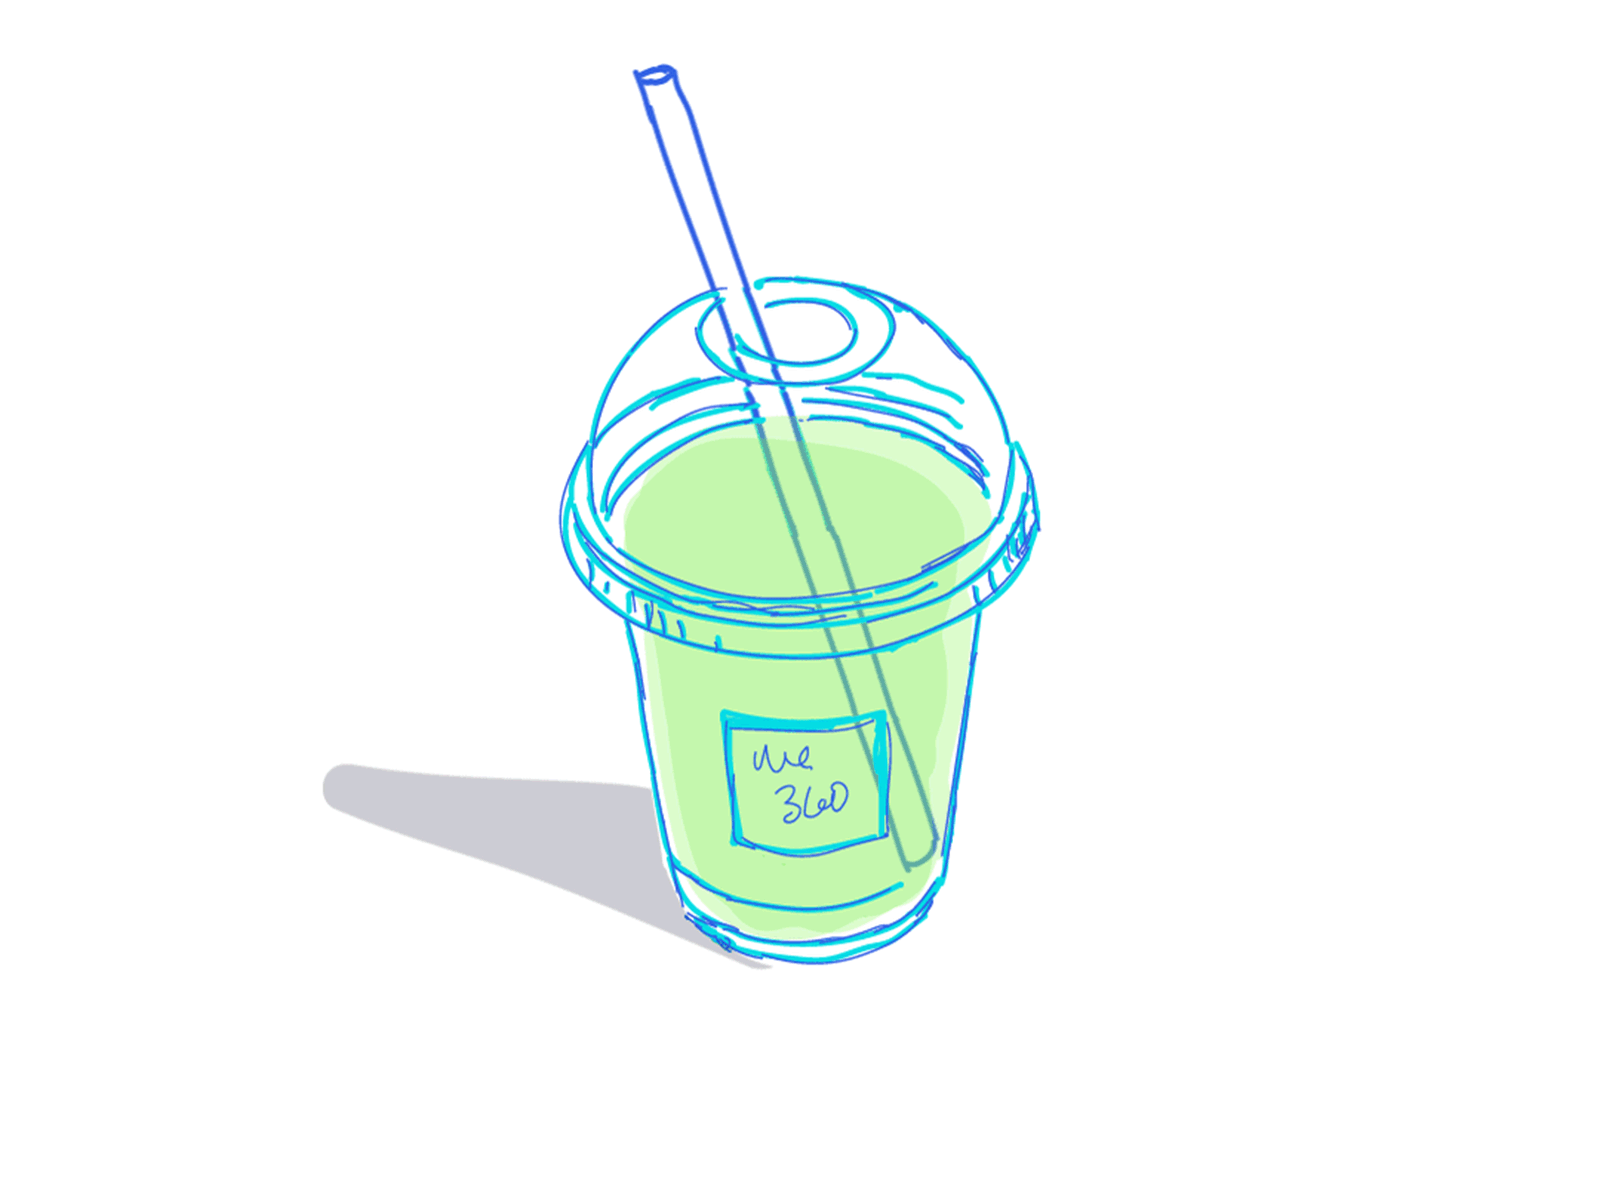 smoothie animatic 2d animation 3d adobe illustrator animated interface animatic bright colors cute design graphic design hand drawn illustration interface interface animation interface design ui ux vector visual design wacom intuos wacom tablet